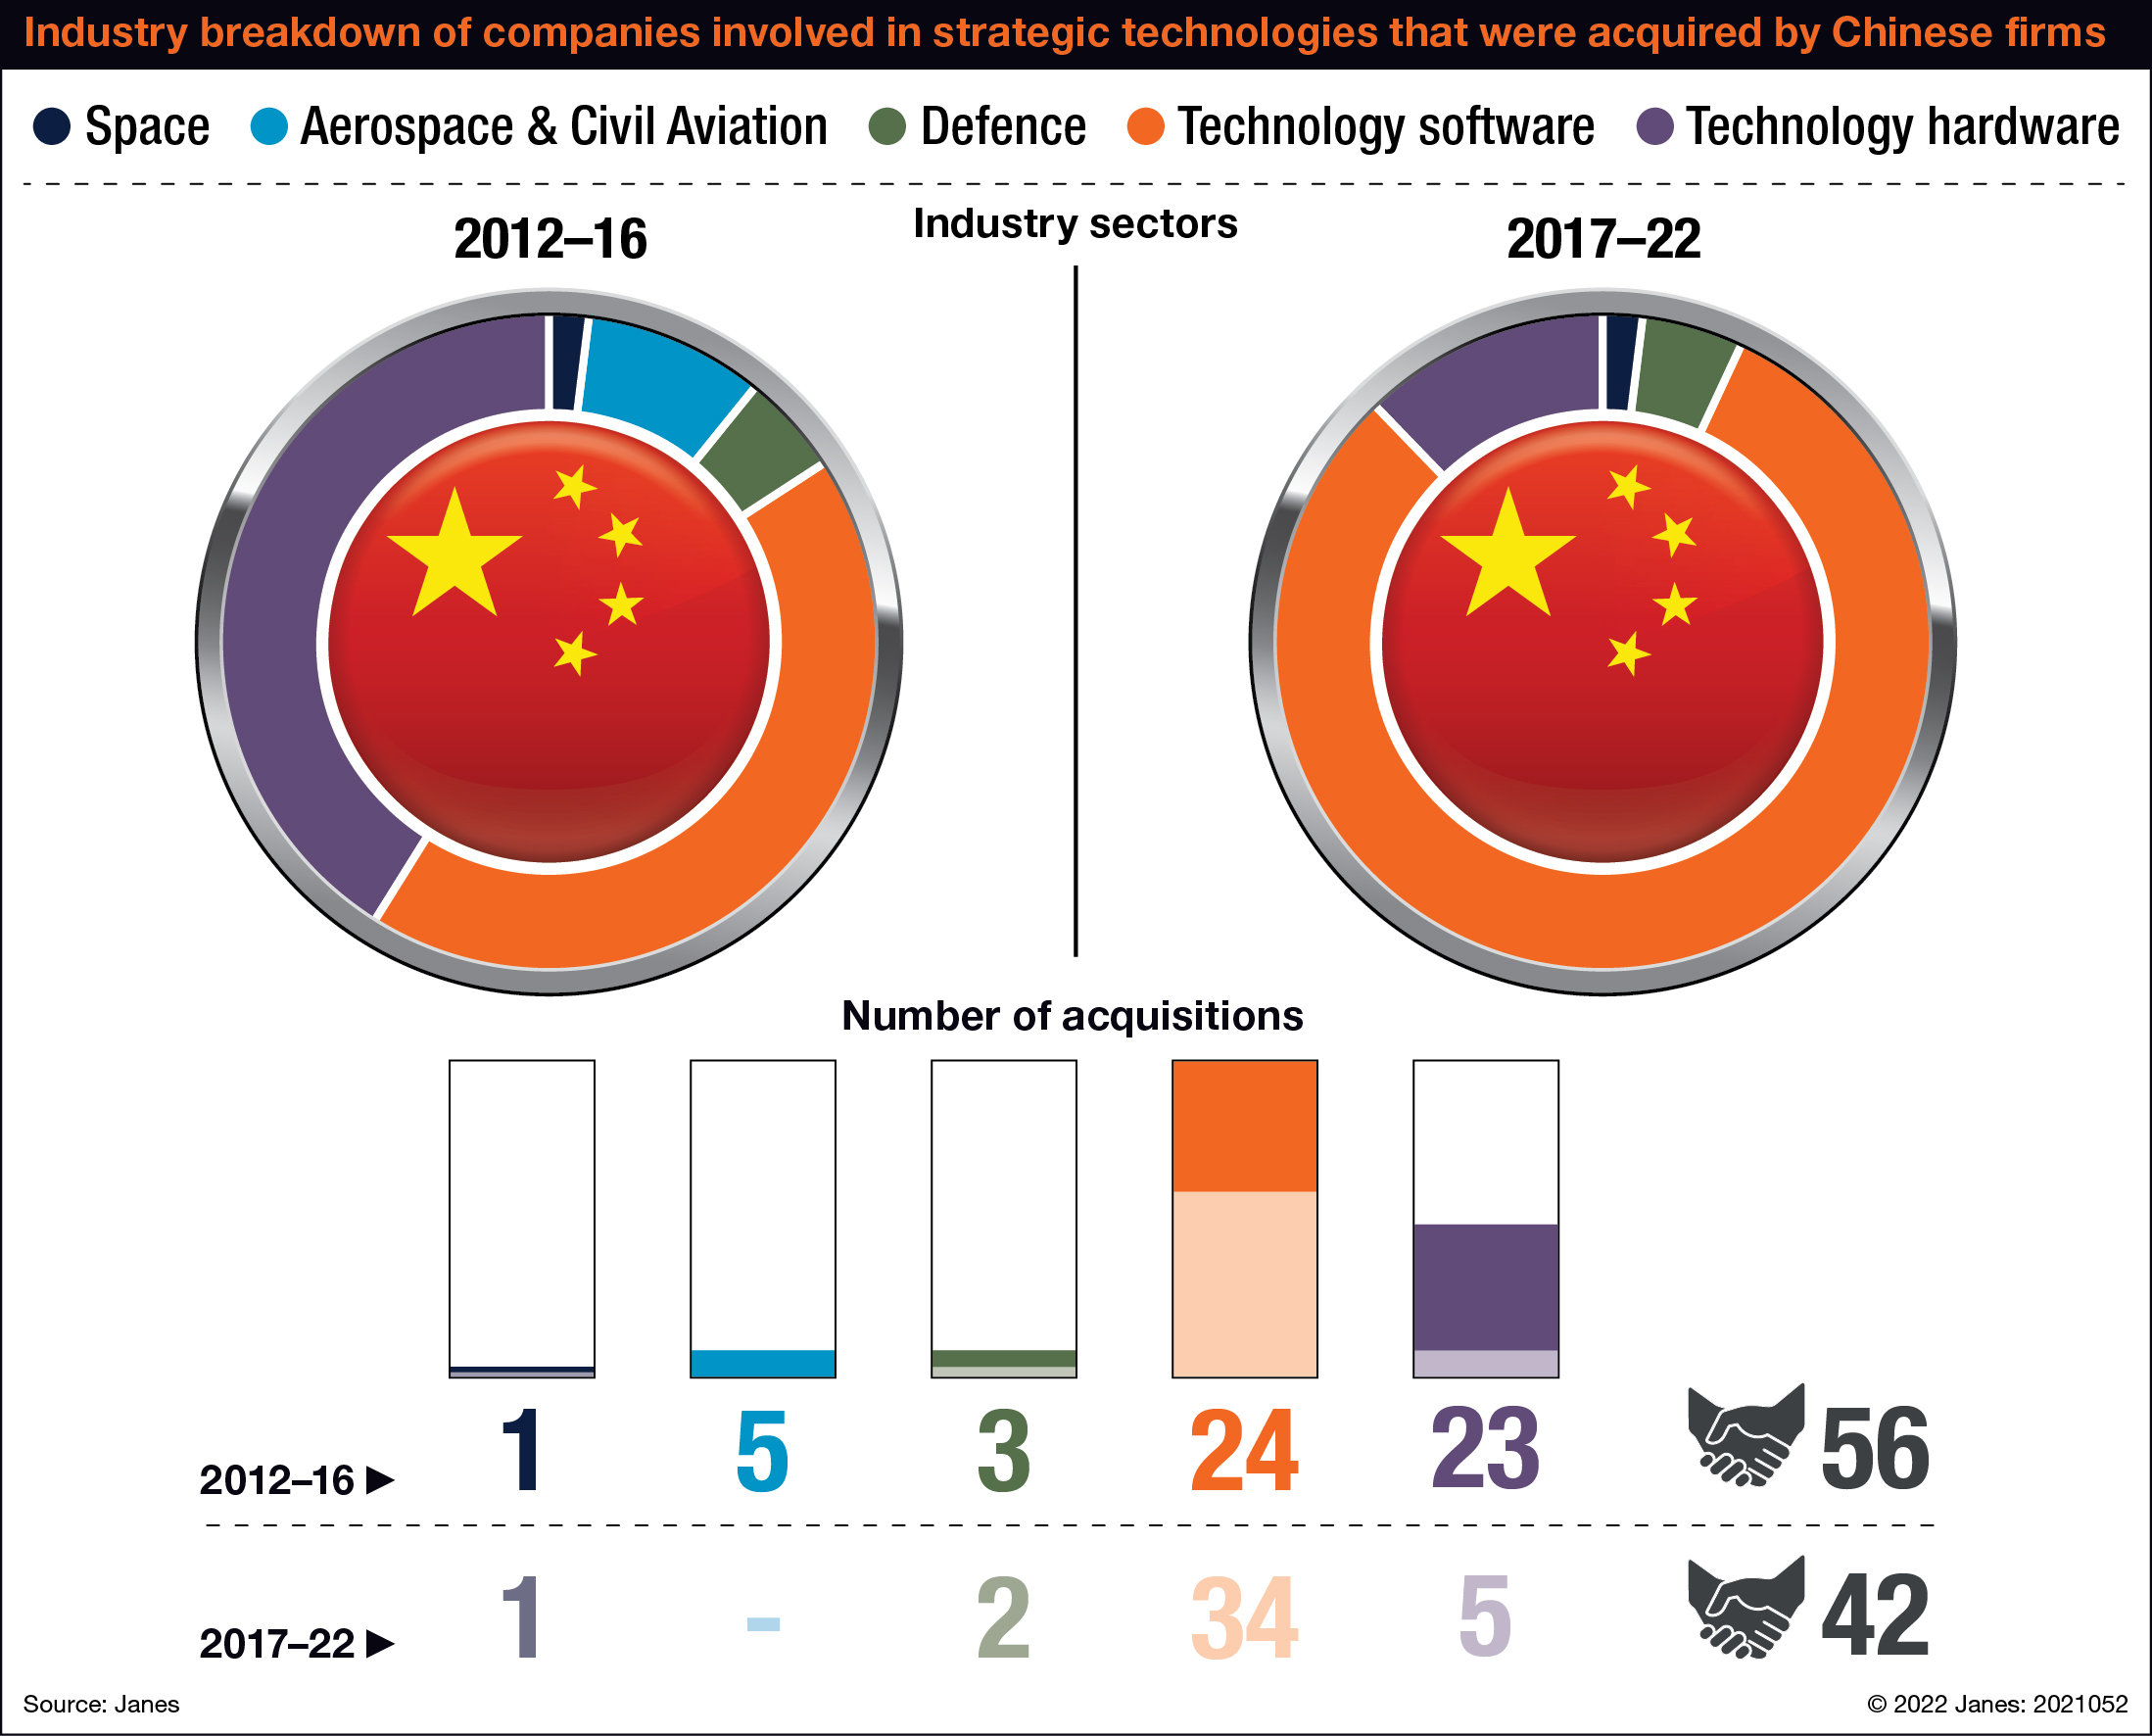 Industry breakdown of companies involved in strategic technologies that were acquired by Chinese firms